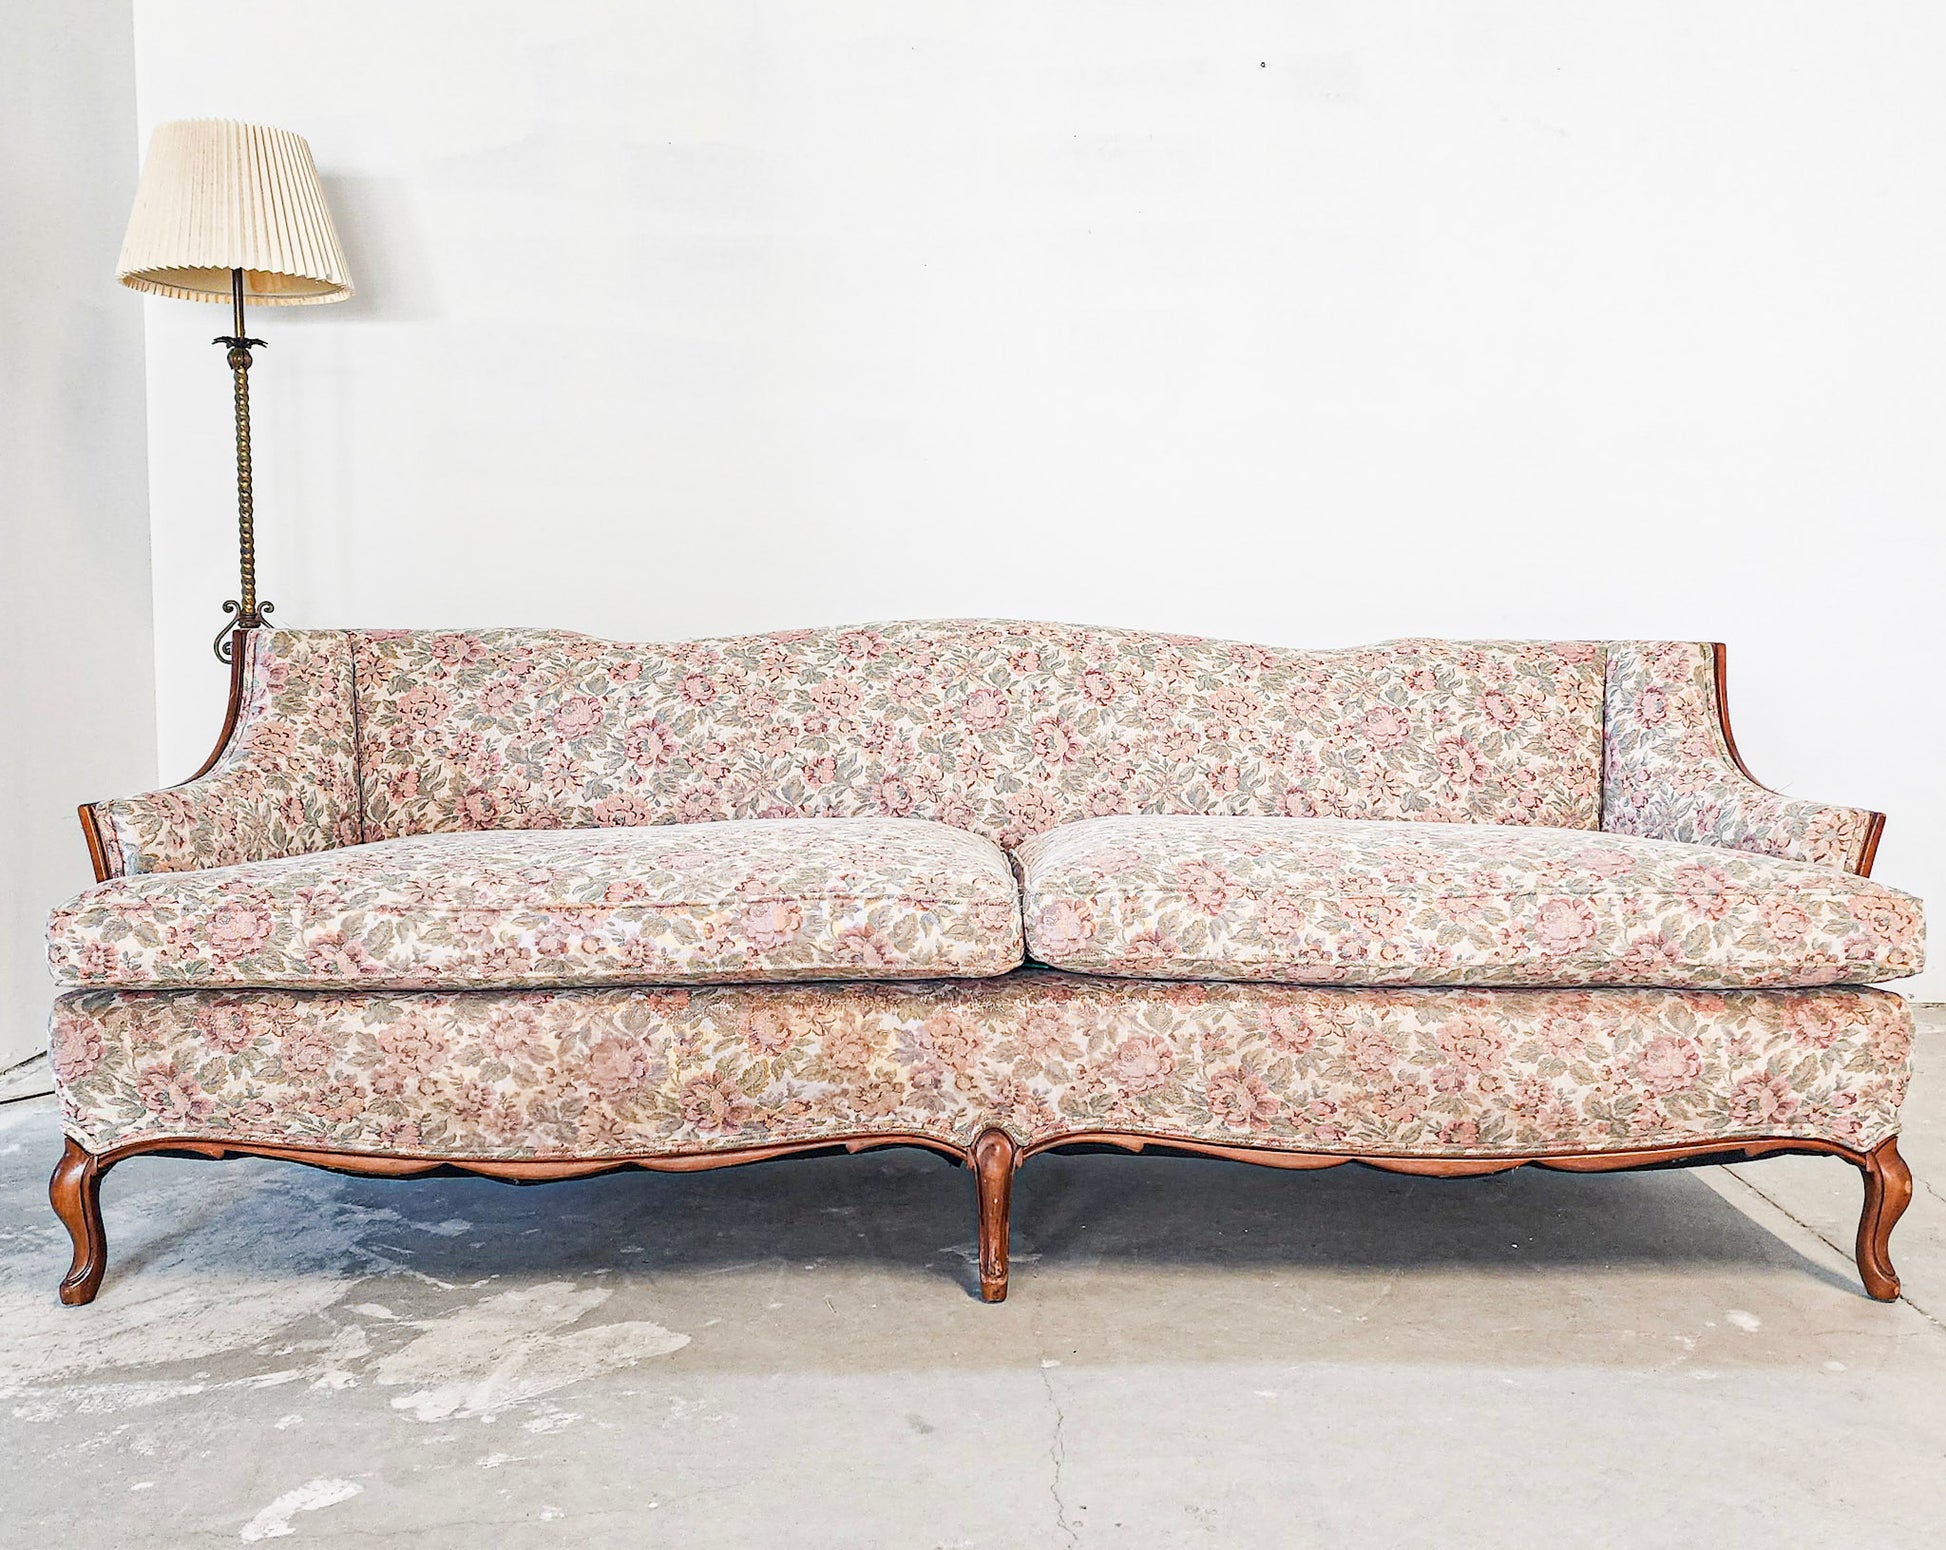 Antique Pink Floral Tapestry Sofa - Reclaimed Mt. Goods